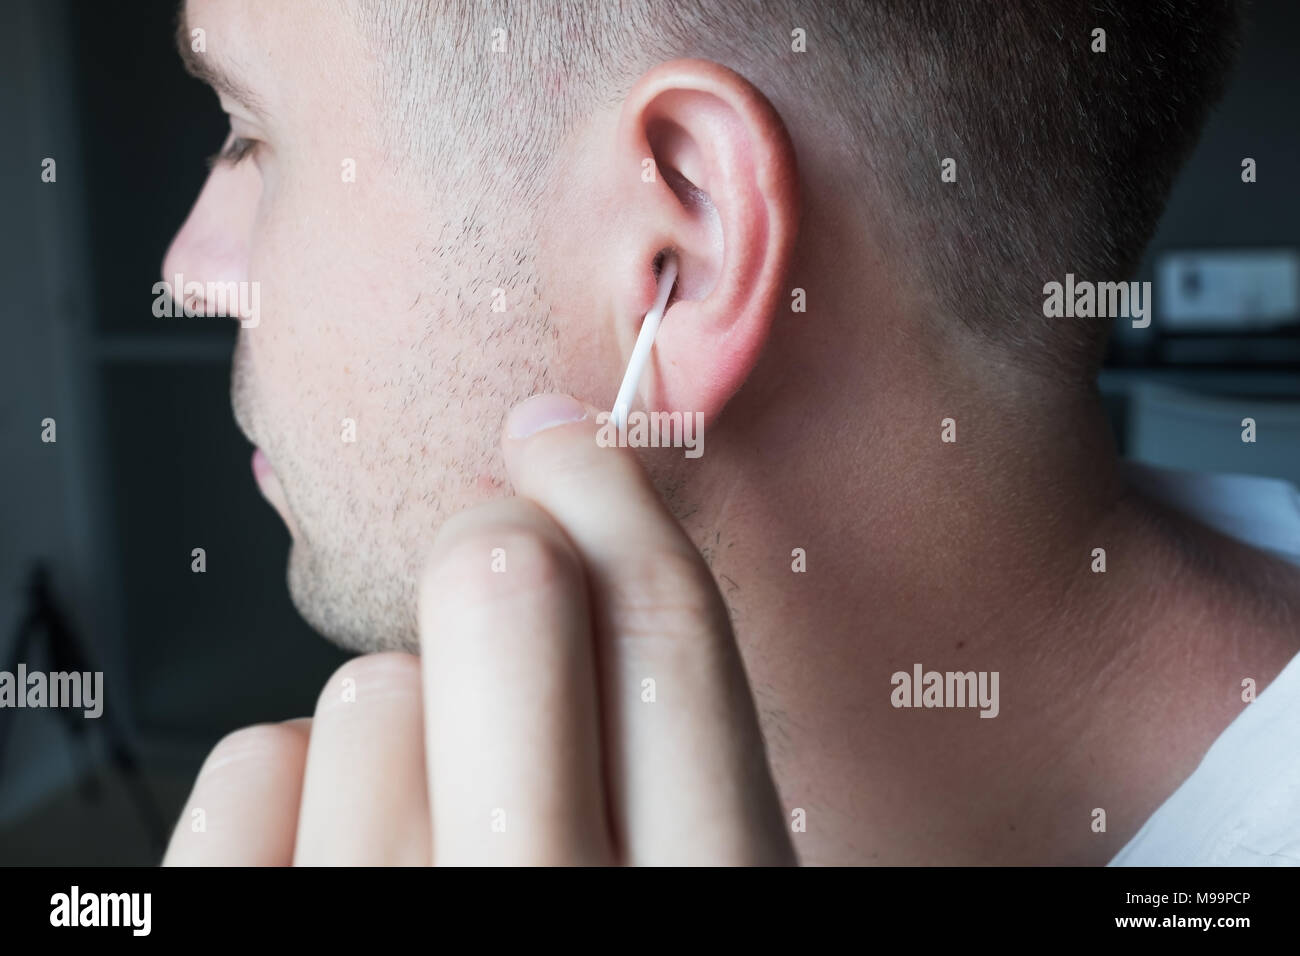 Close up shot of caucasian man cleaning his ears Stock Photo